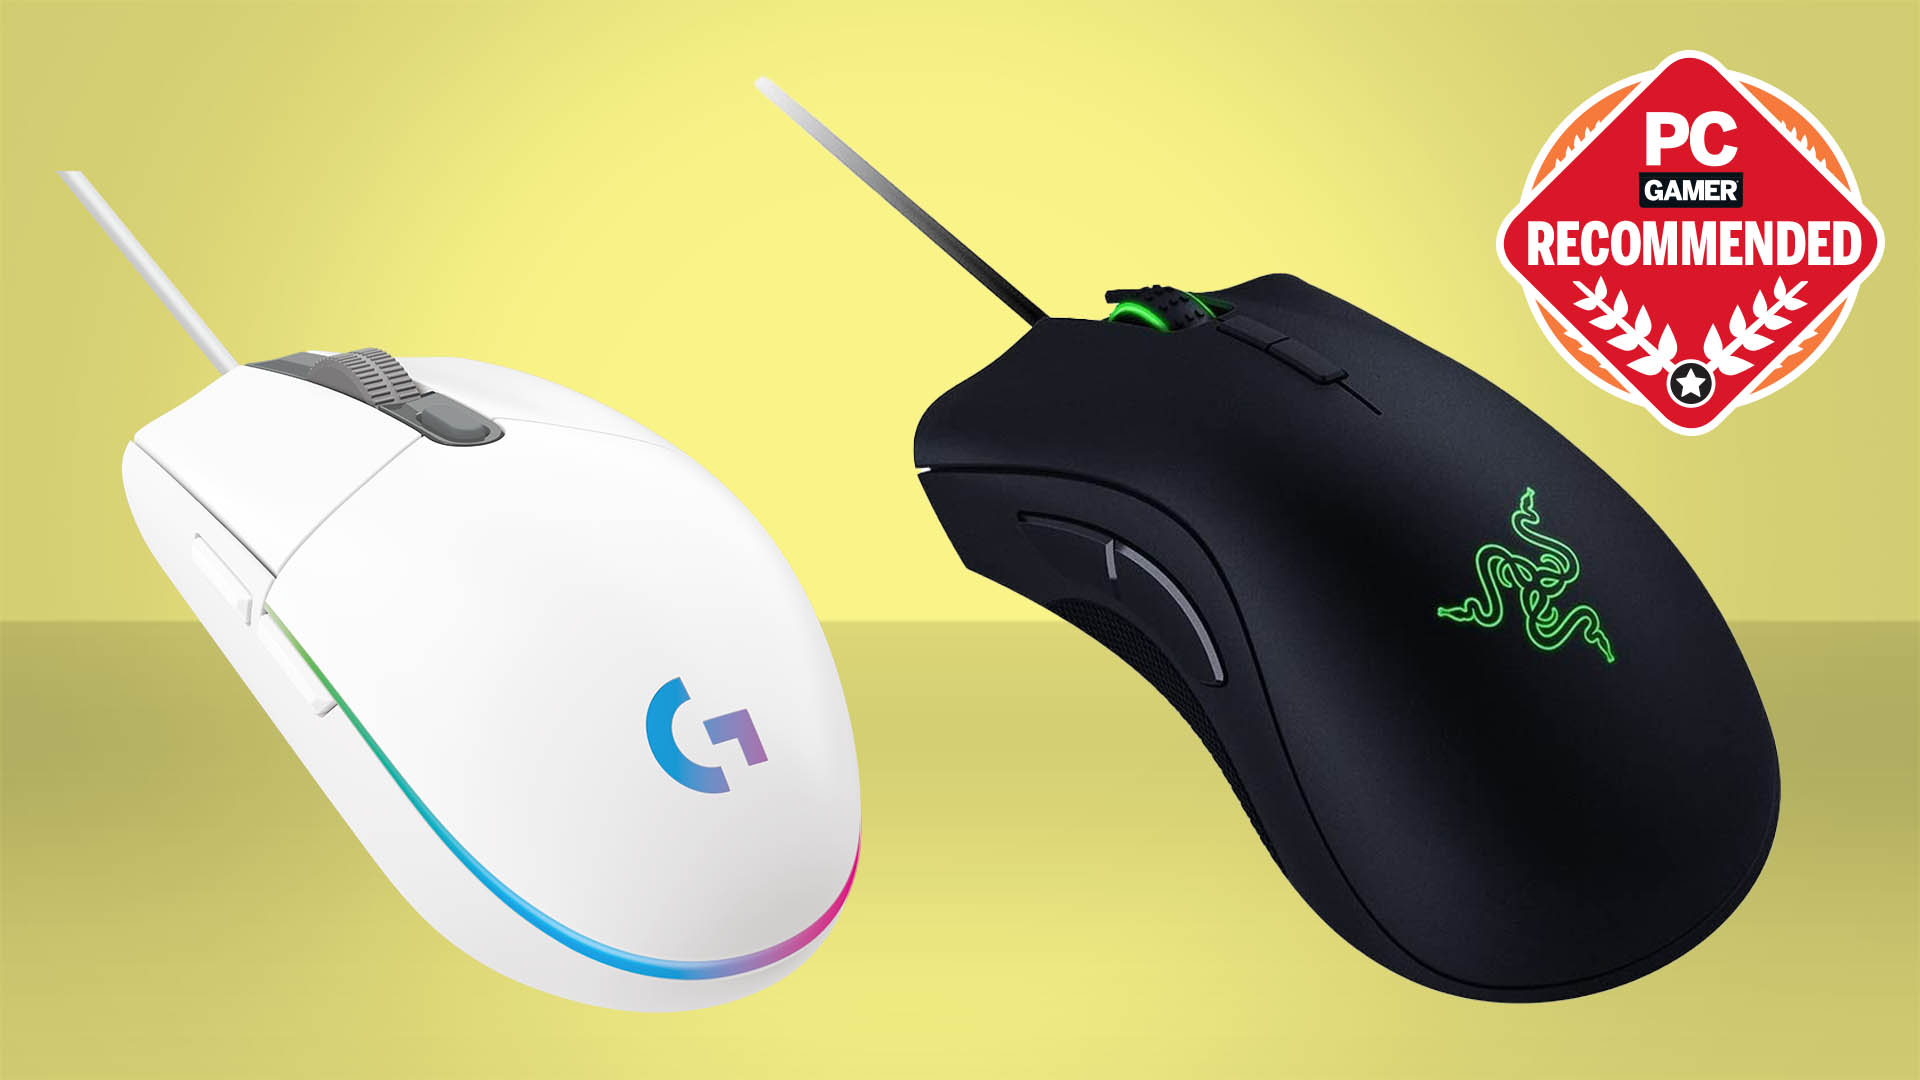  The best gaming mouse in 2020 